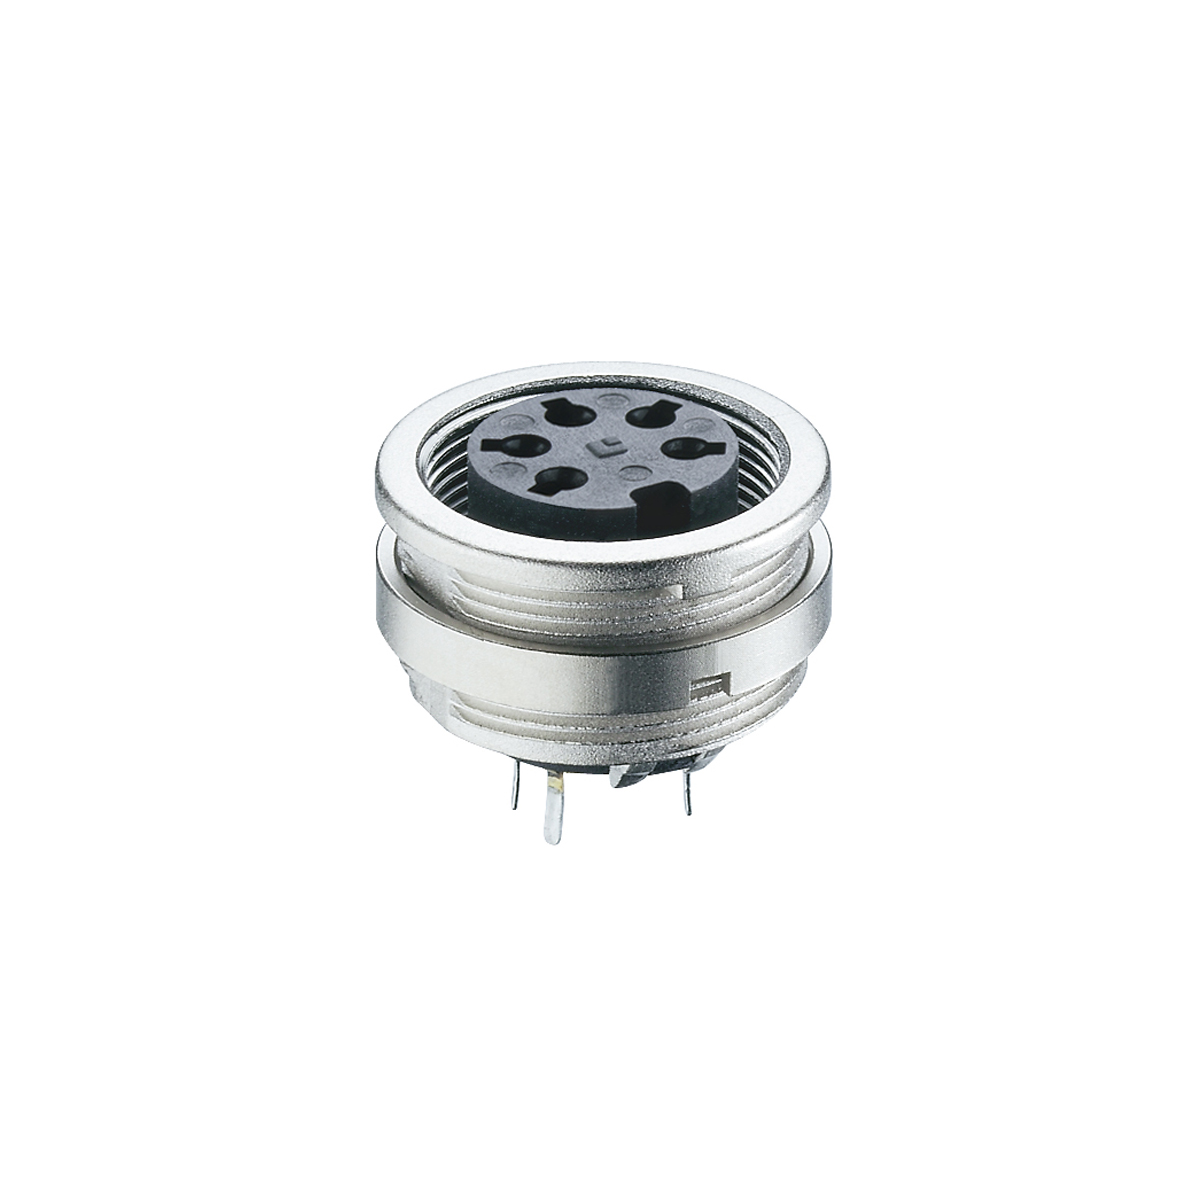 Lumberg: KFR (Series 03 | Circular connectors with threaded joint M16 acc. to IEC 61076-2-106, IP40/IP68)